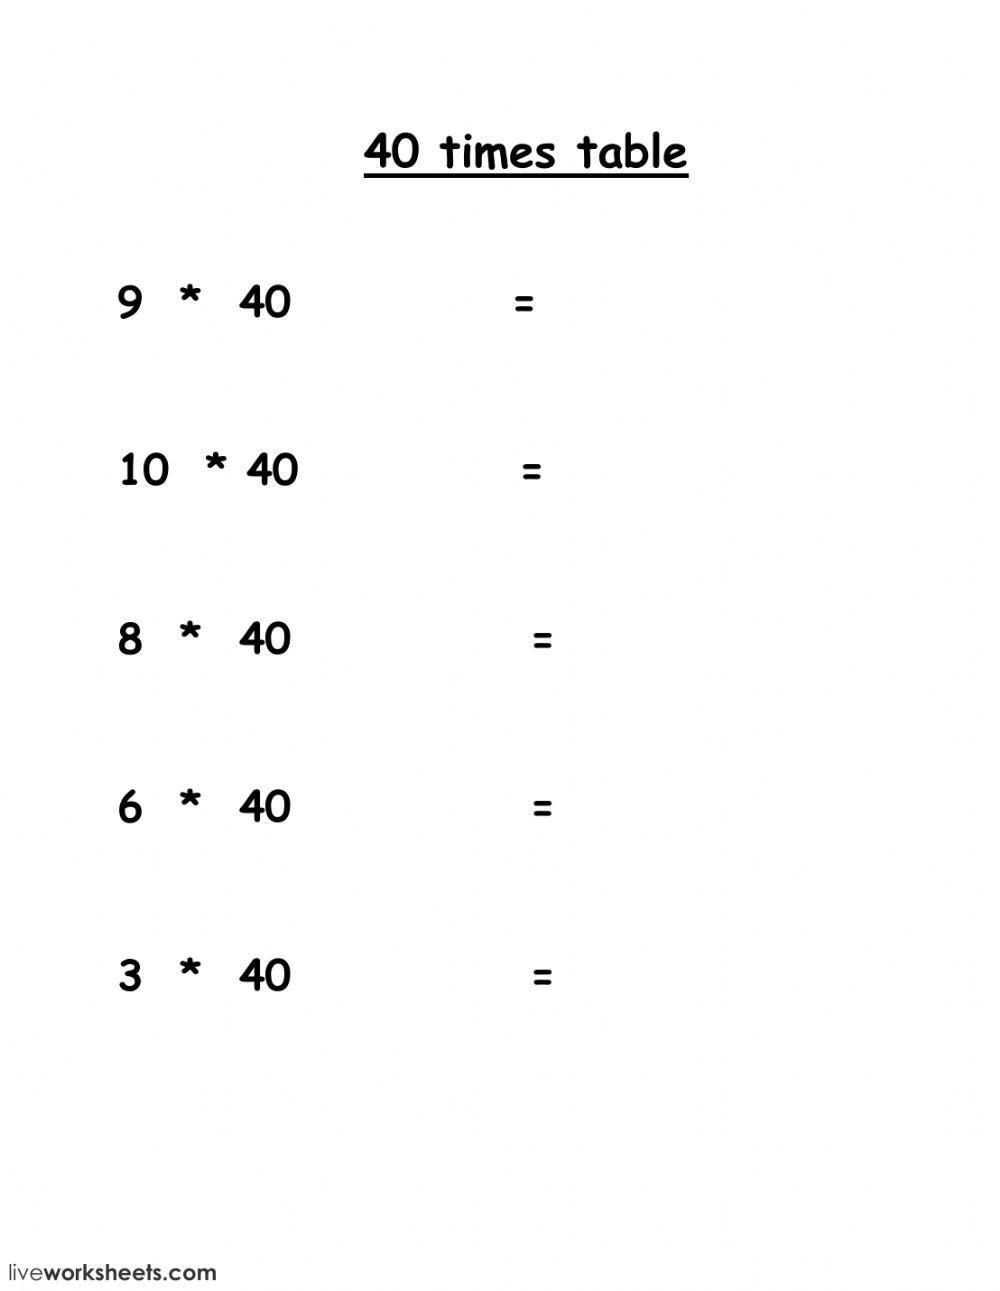 40 times table